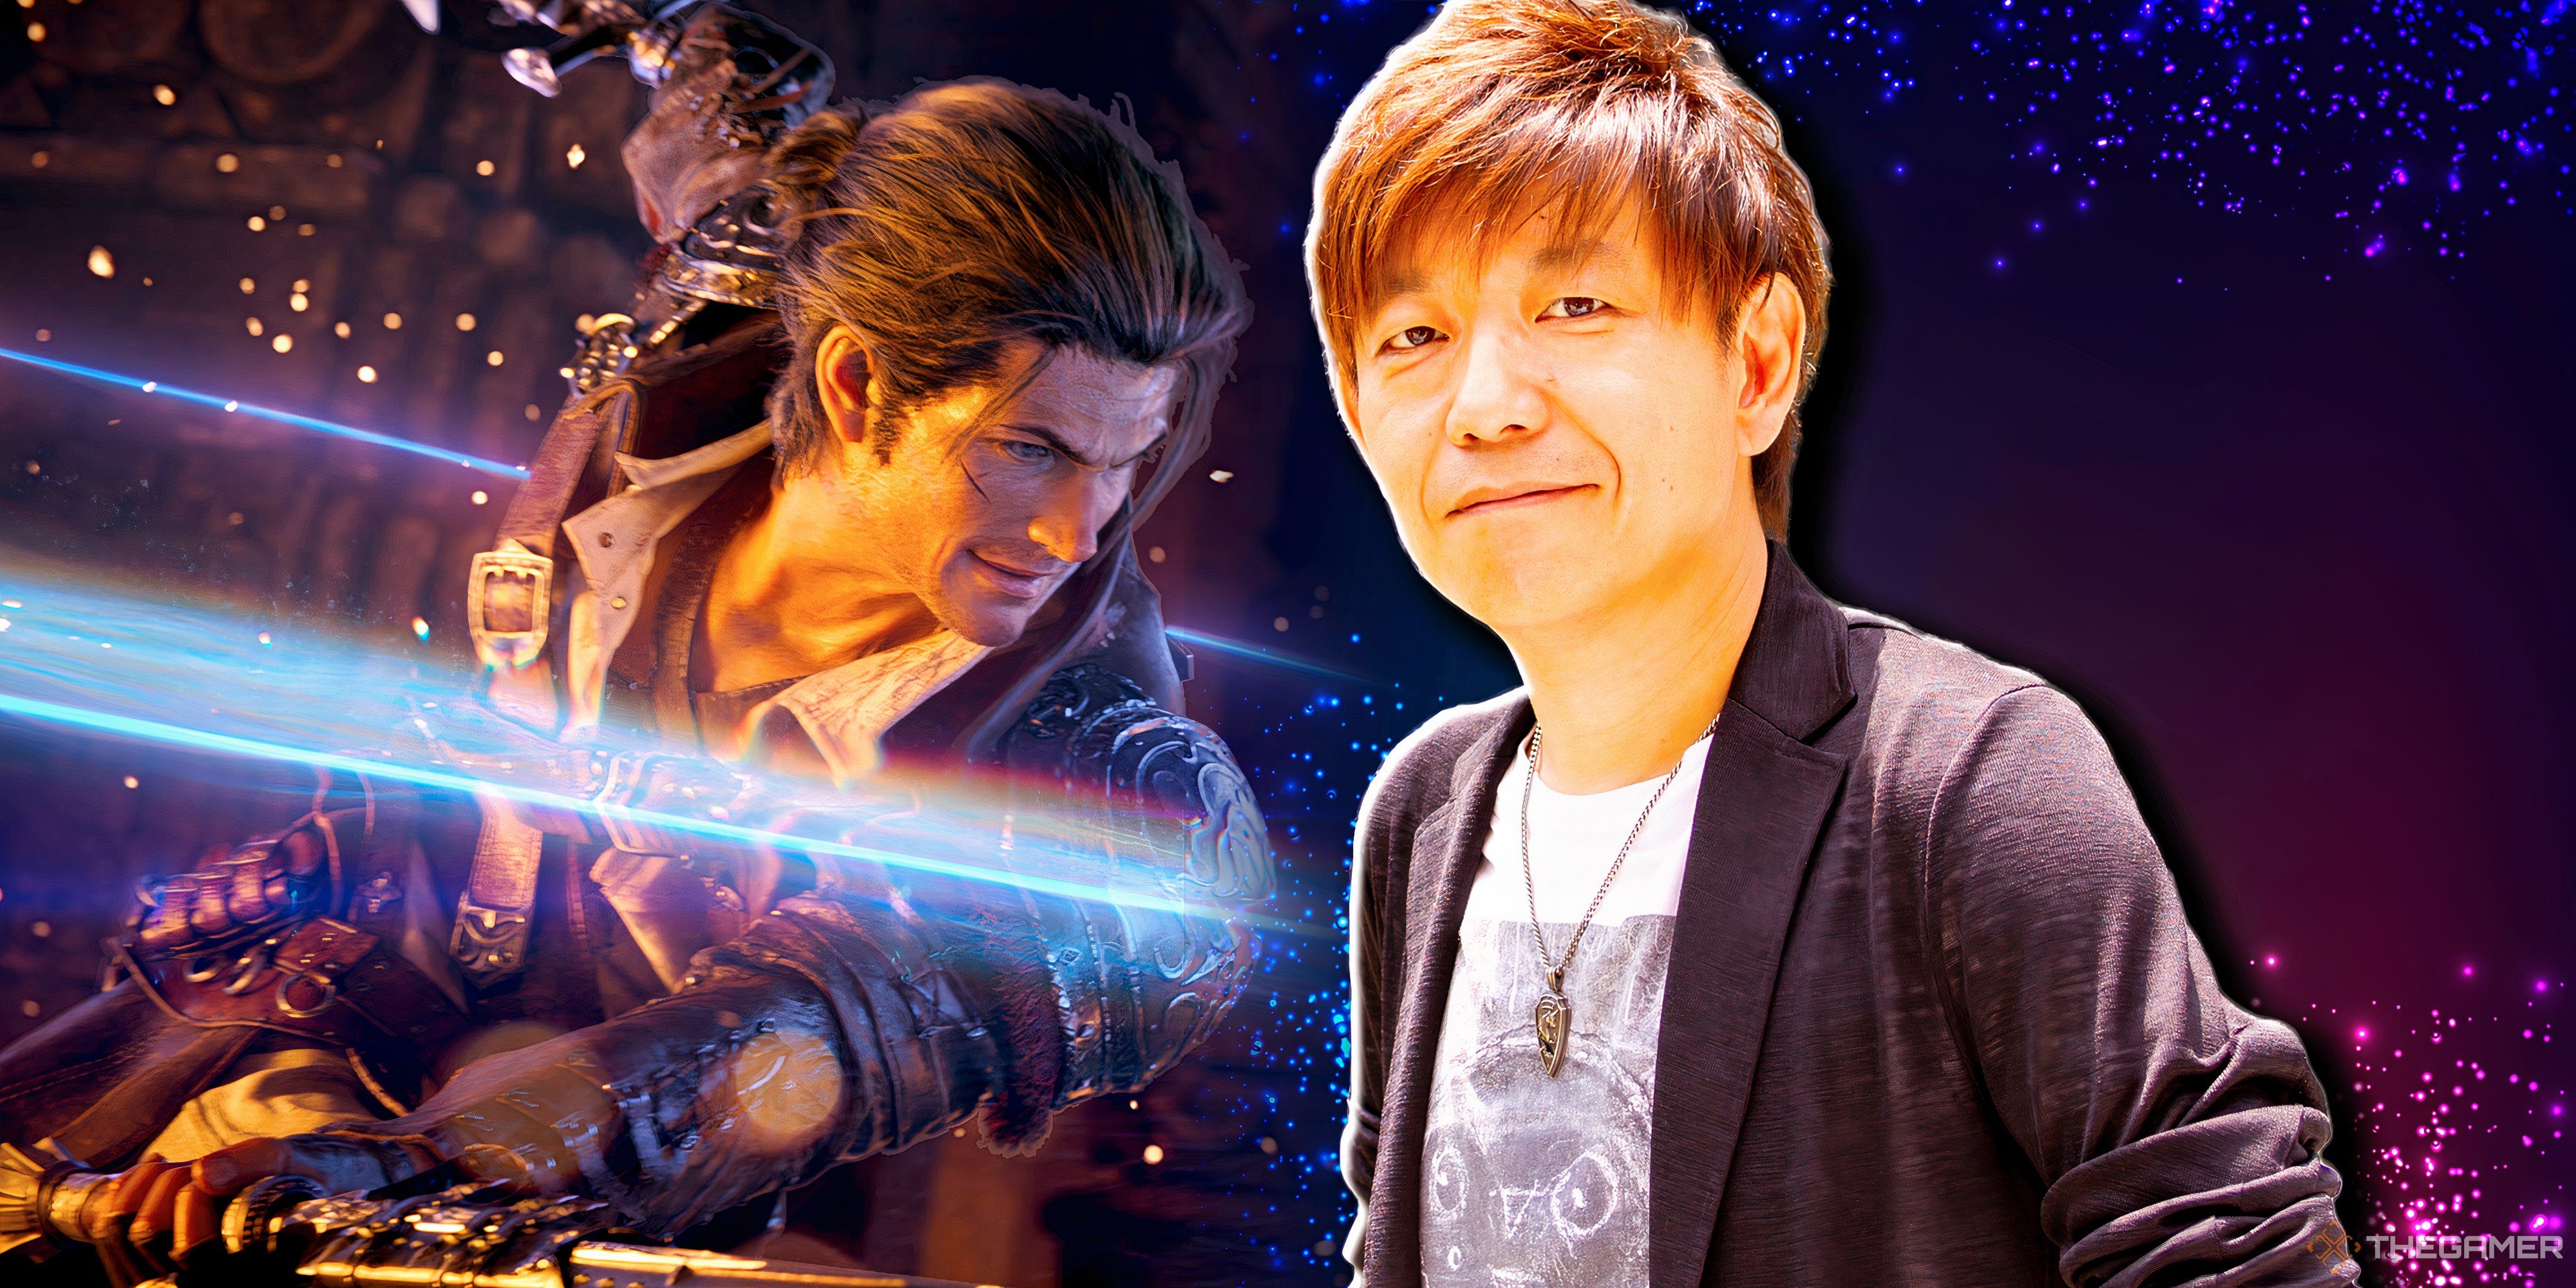 Final Fantasy 14 Will Have “More Original Jobs” After Dawntrail, Says Yoshi-P